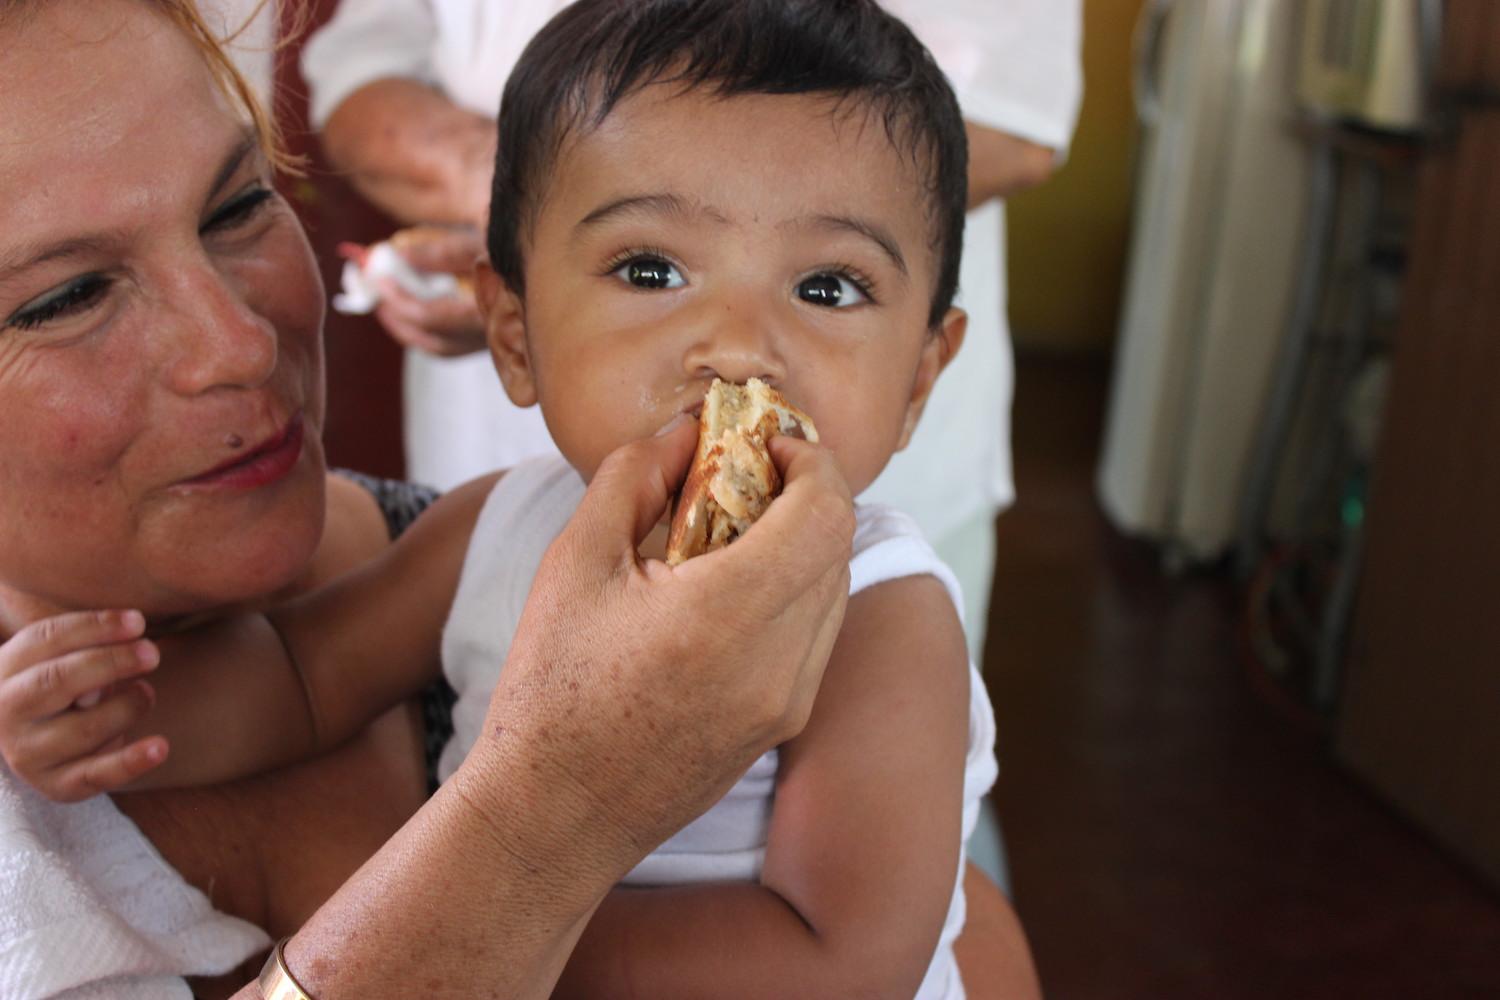 Woman feeding baby solid food - BAMX food bank network fights food insecurity in Mexico